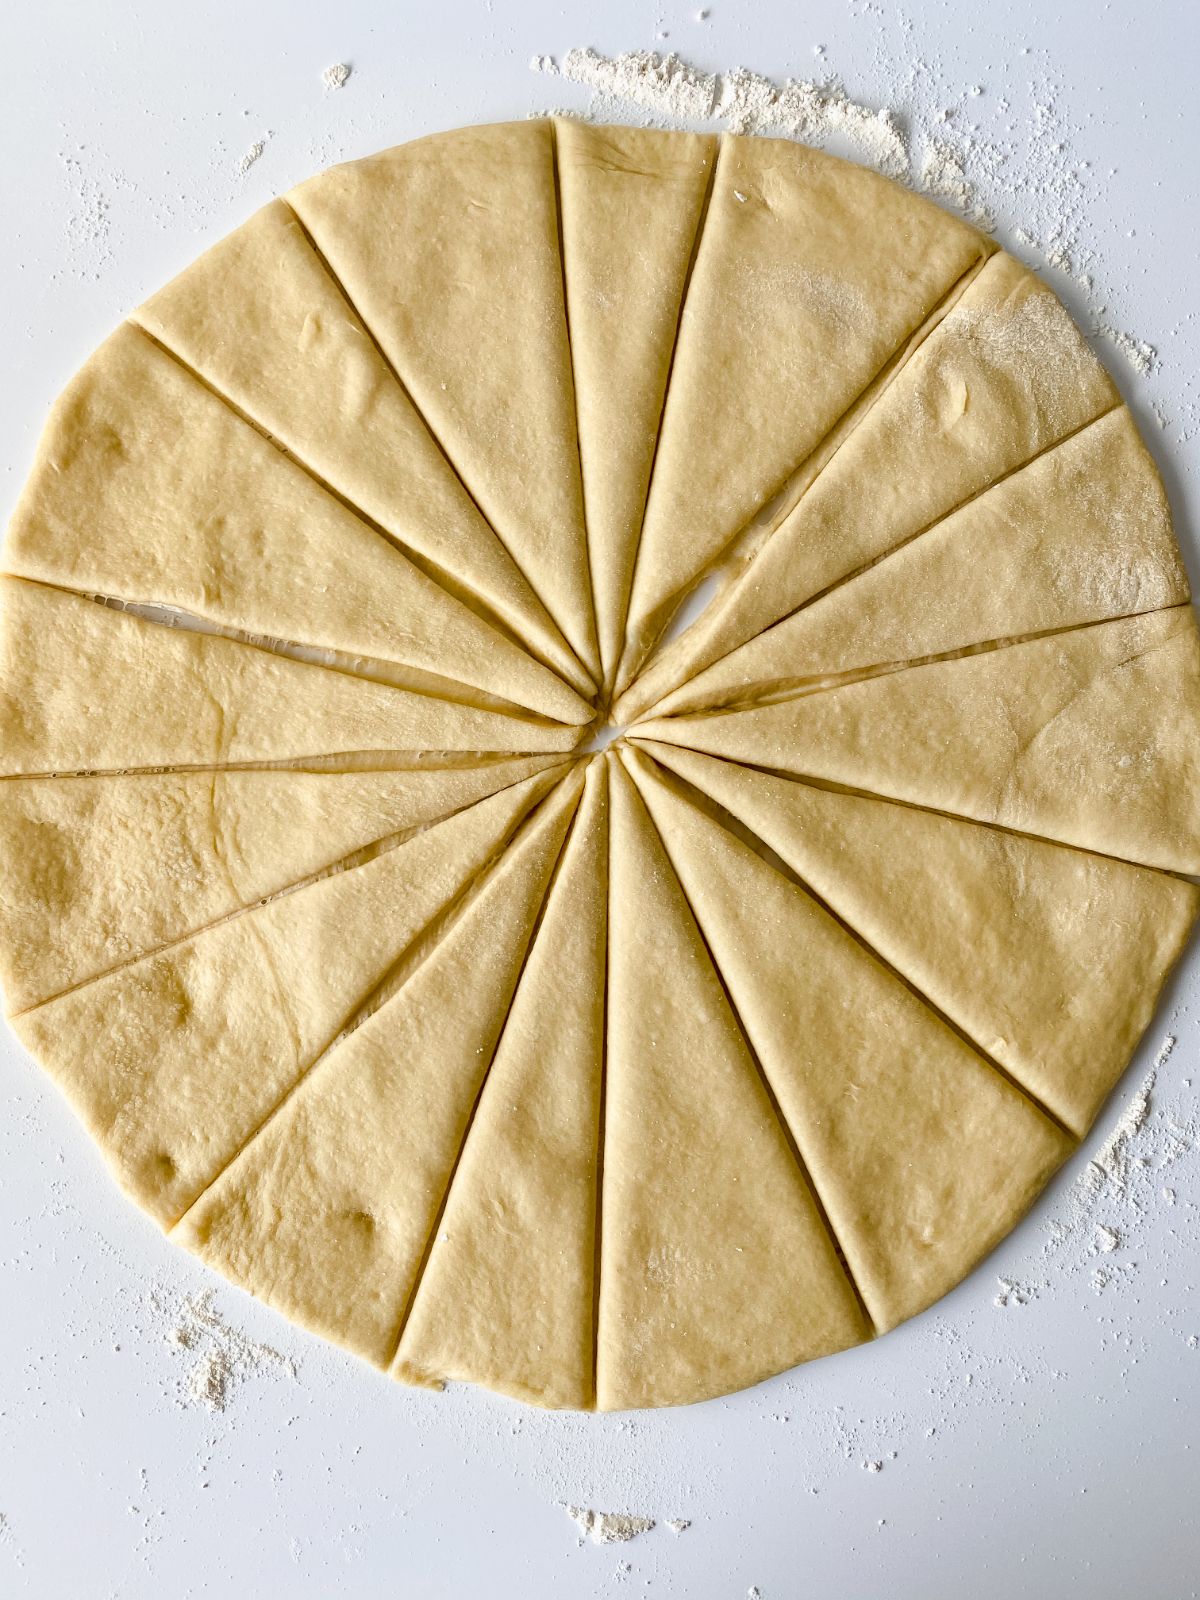 round dough on table cut into triangles